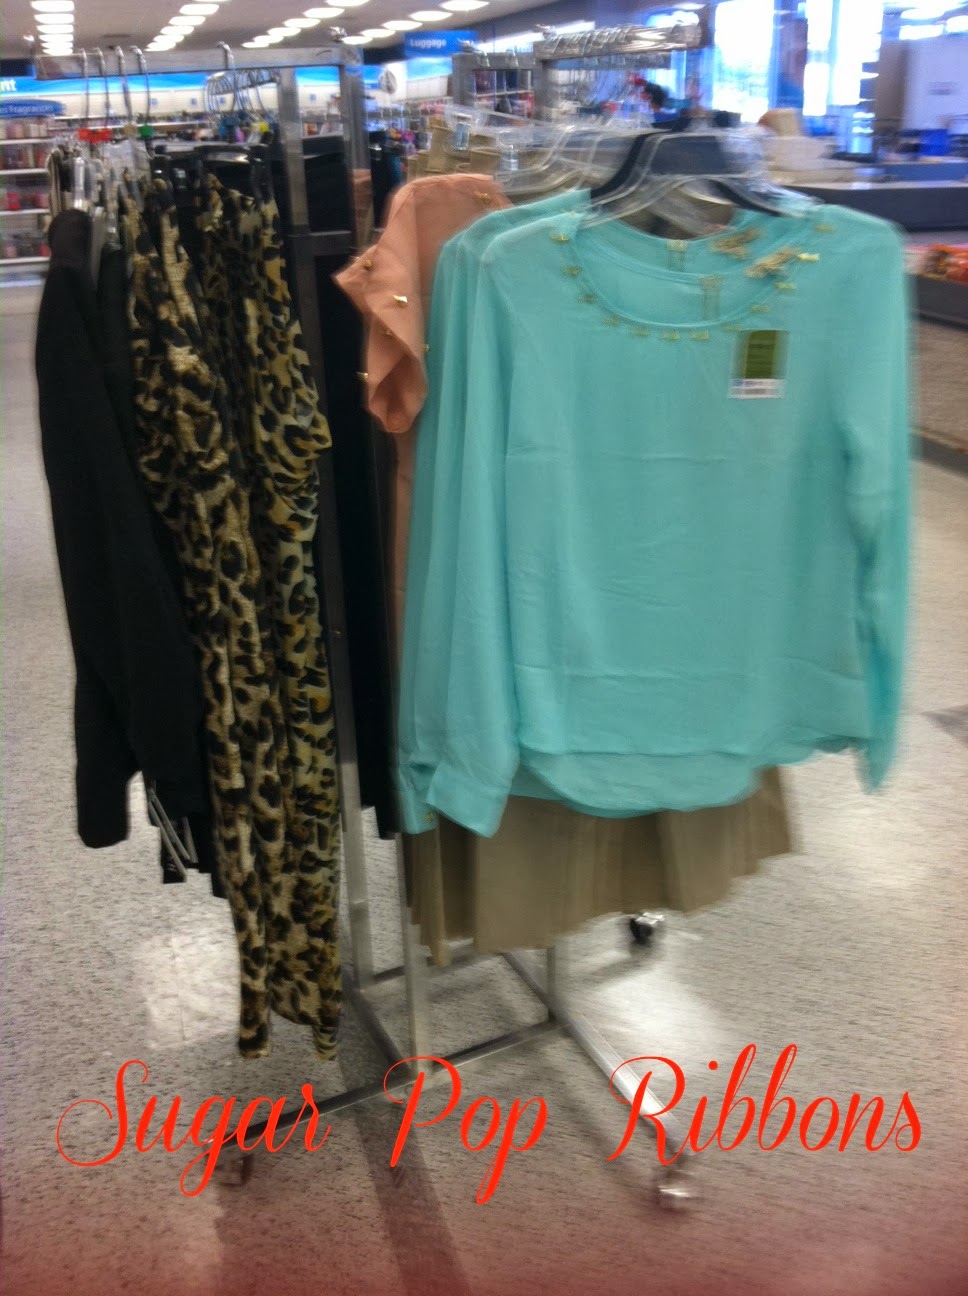 Sugar Pop Ribbons Reviews and Giveaways: Ross Dress for Less Review and ...